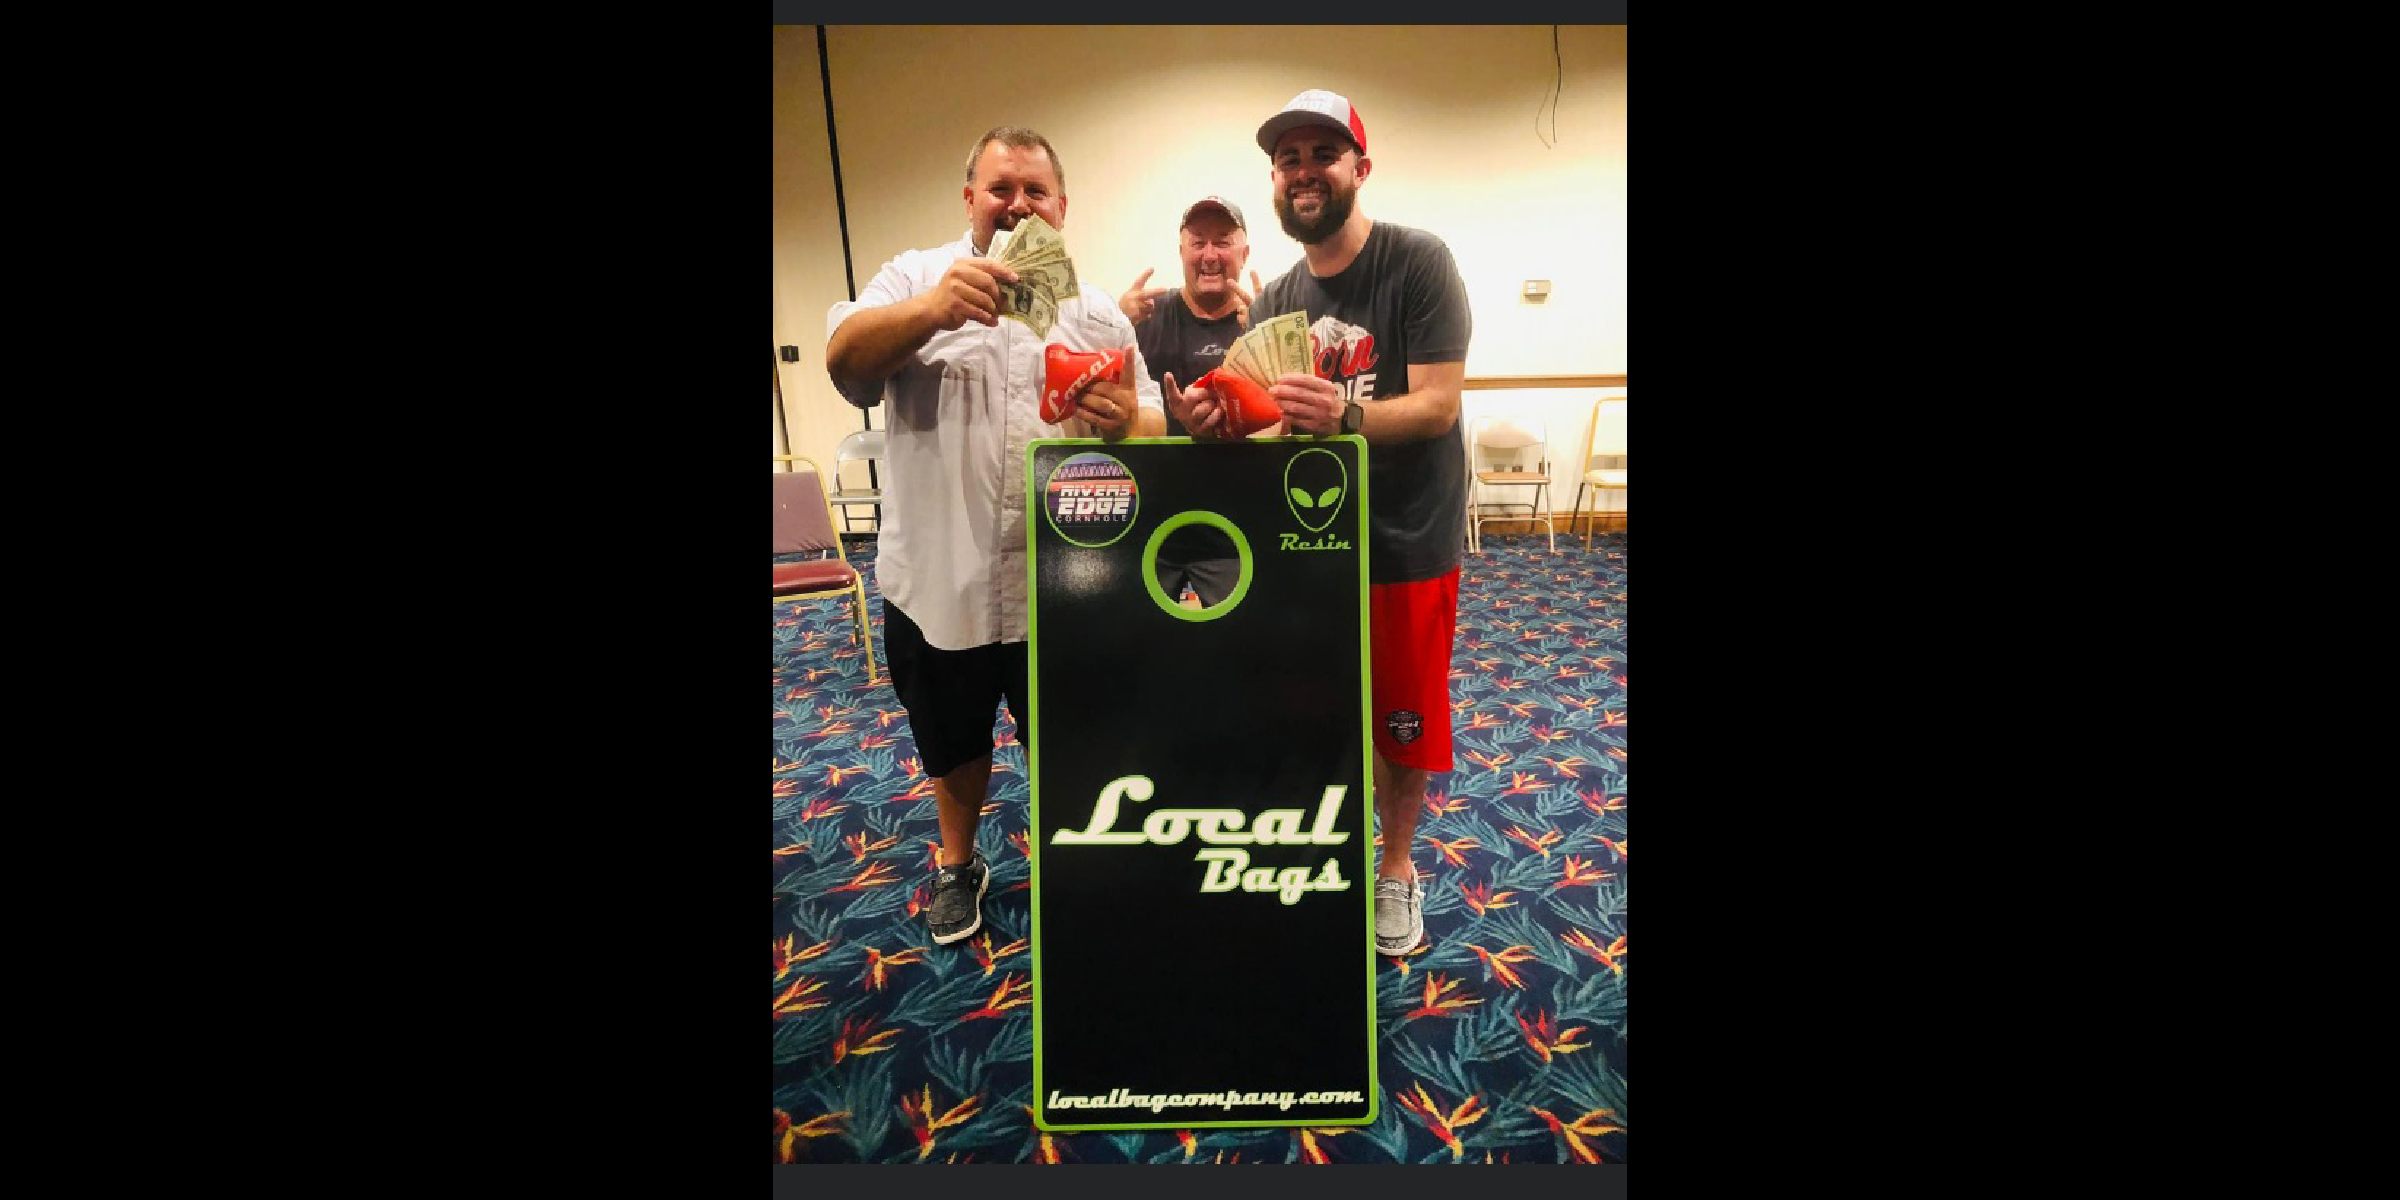 Local Bags  ACL Approved  Mamba Series  Why So Serious Pro Cornhole   CornholeBagscom